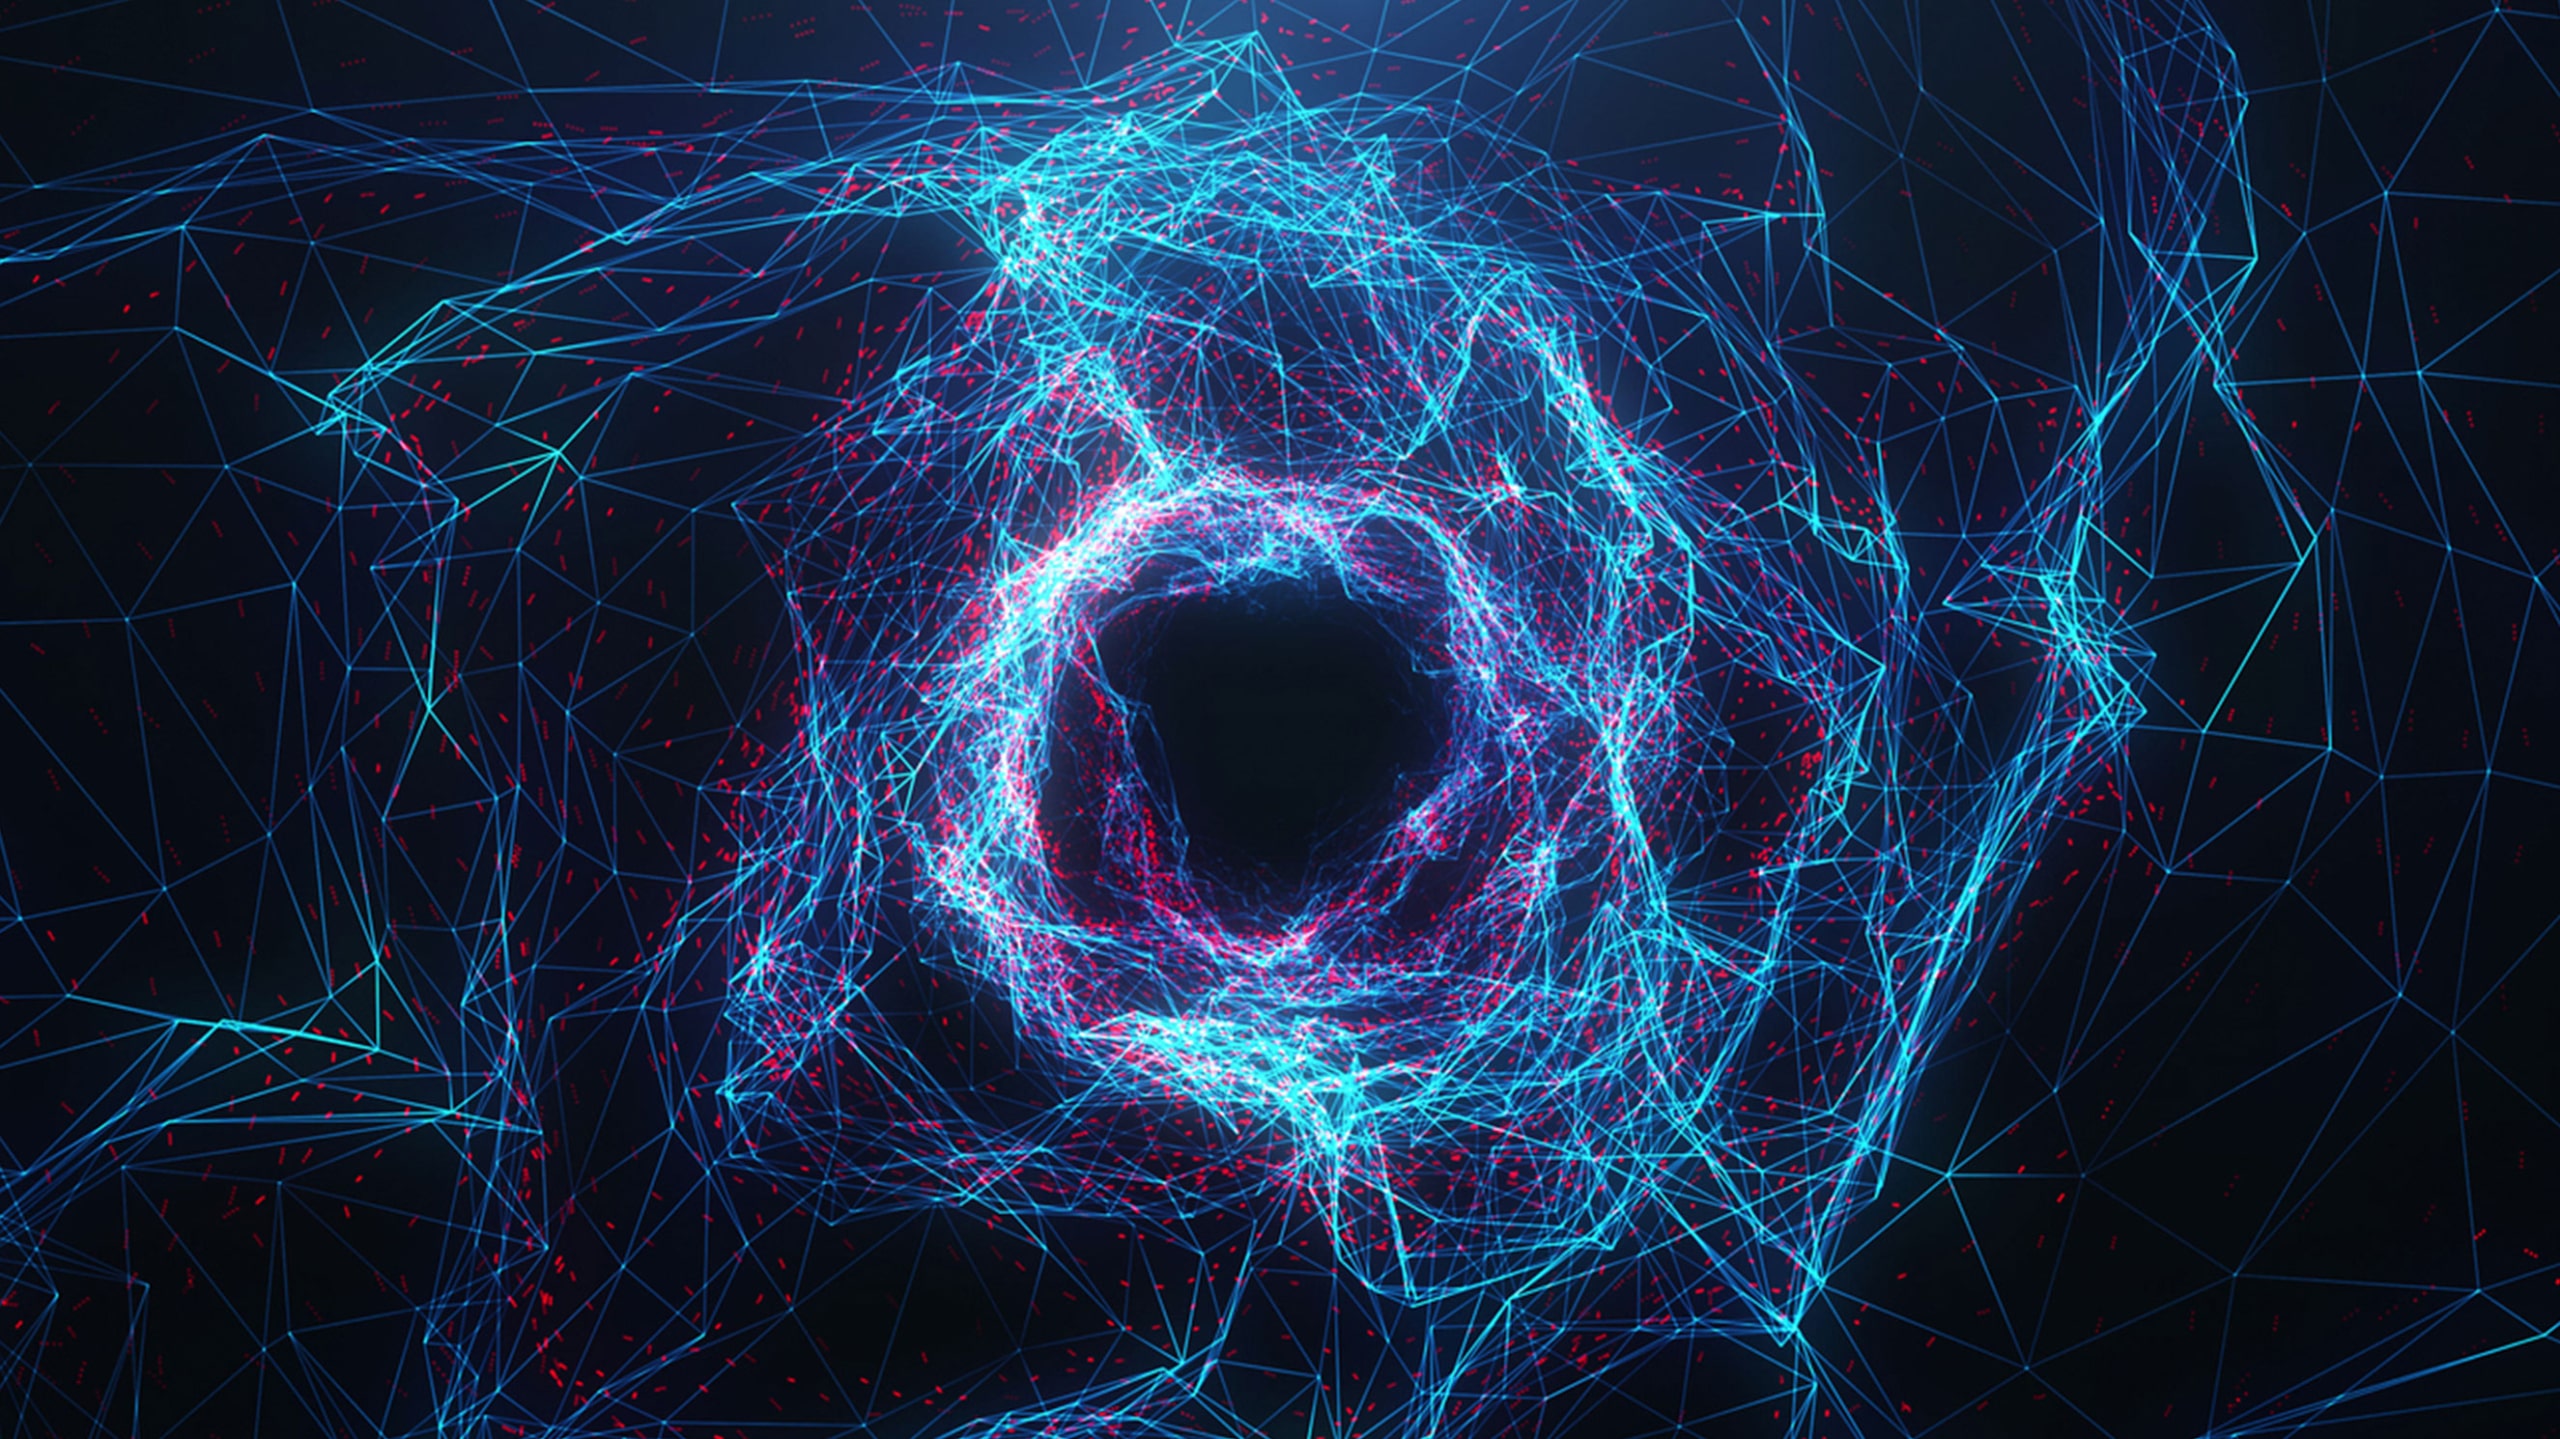 A digital illustration of a glowing blue and pink vortex surrounded by interconnected neon lines and geometric shapes on a dark background, representing a complex network or data stream.